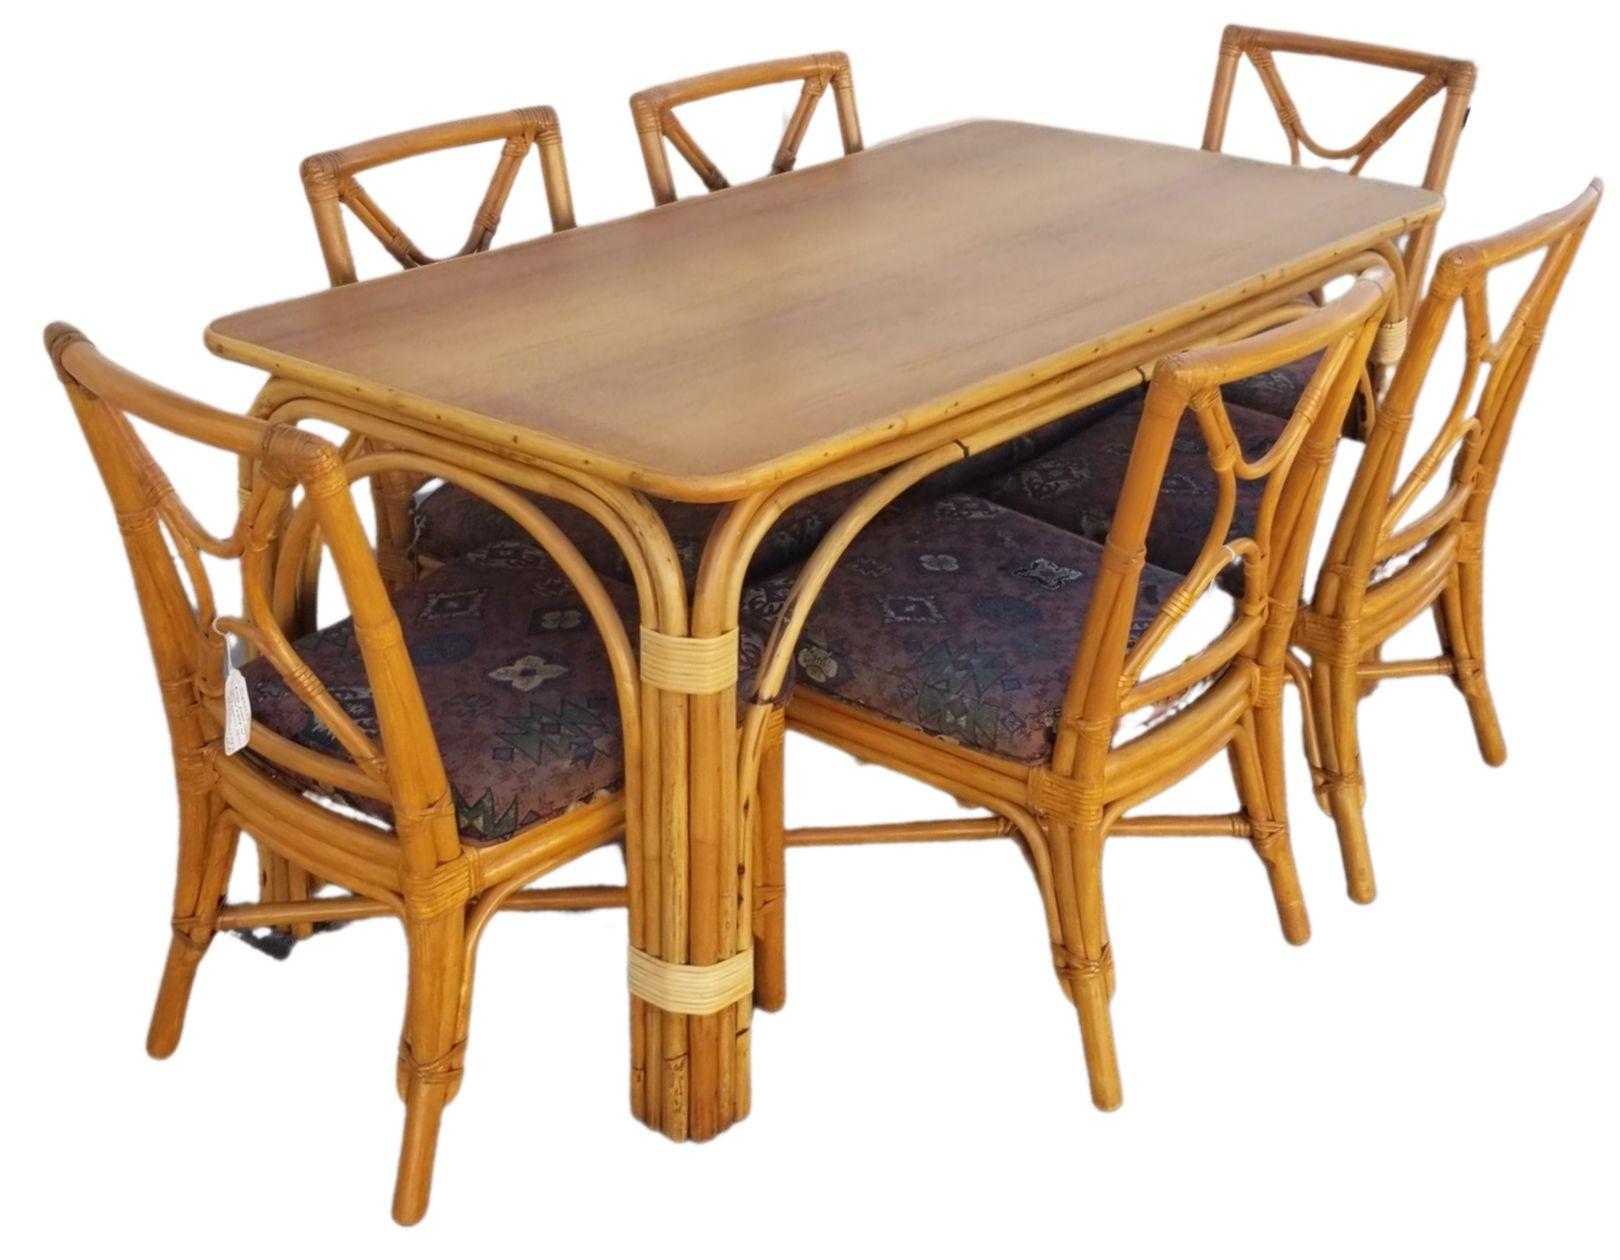 Ficks Reed Restored Rattan Dining Room Table and Chairs Set In Excellent Condition For Sale In Van Nuys, CA